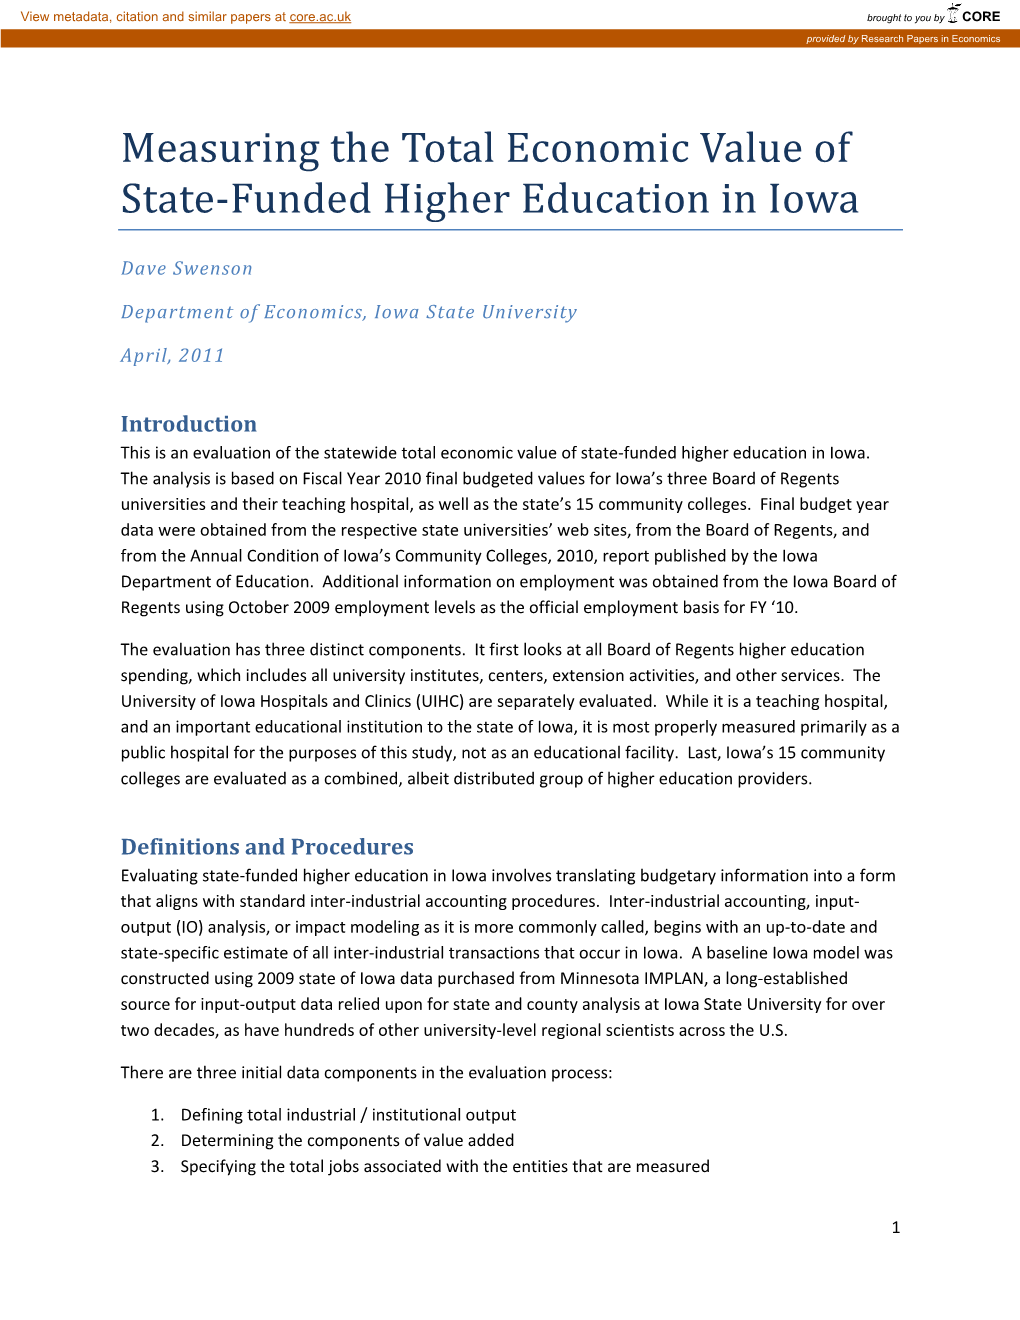 Measuring the Total Economic Value of State Funded Higher Education